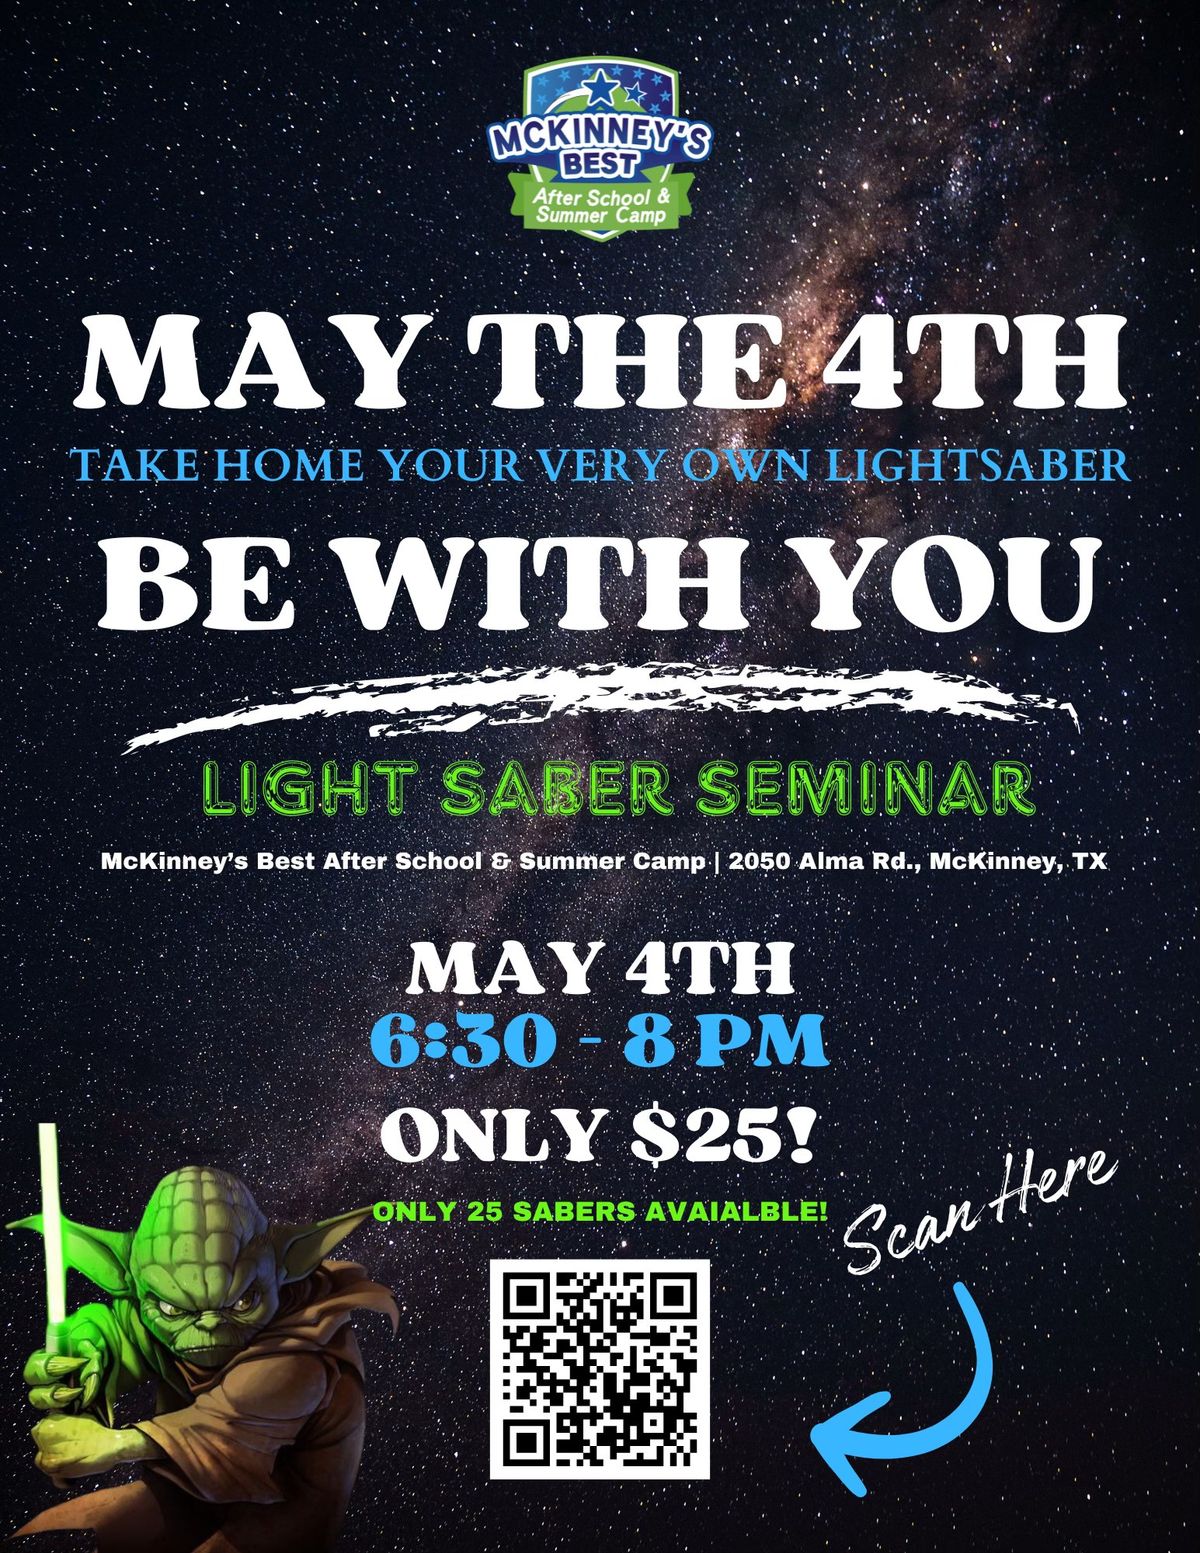 May The 4th Be With You - Light Saber Seminar Event